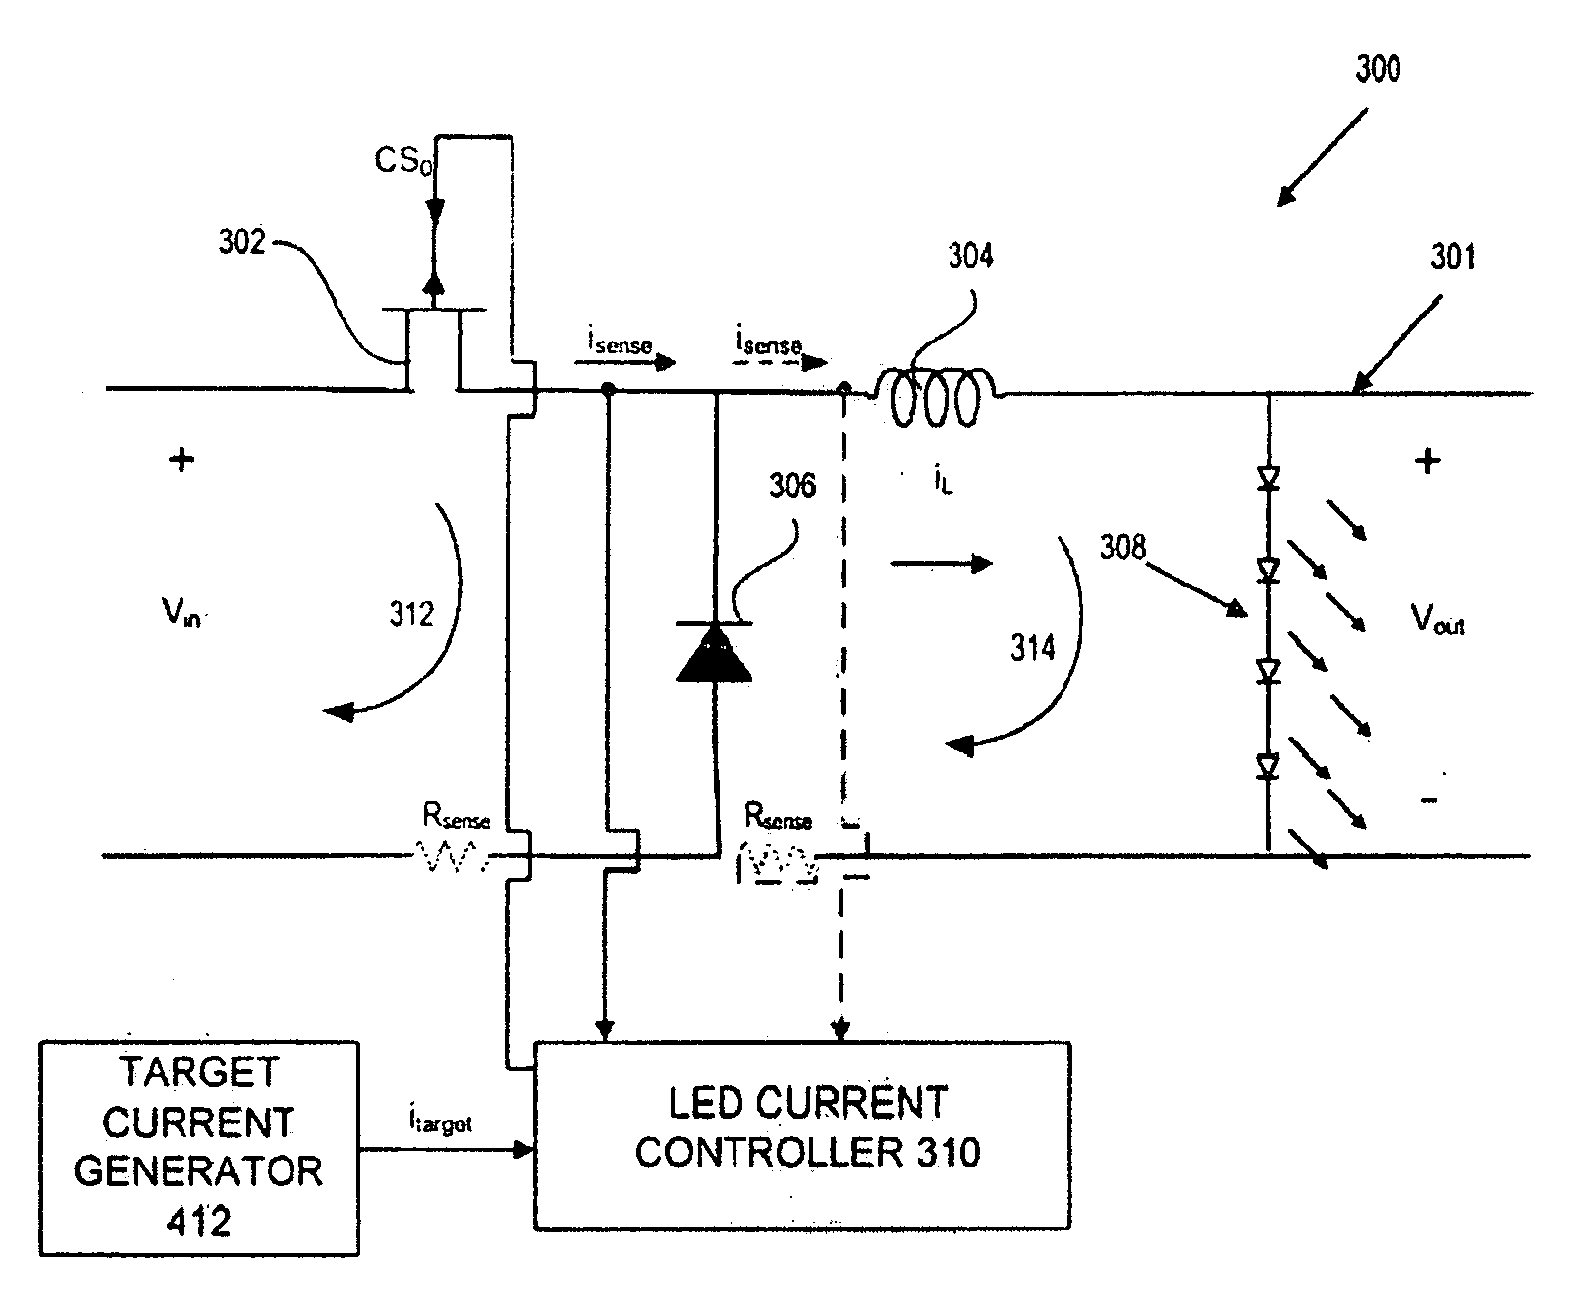 Adjustable Constant Current Source with Continuous Conduction Mode ("CCM") and Discontinuous Conduction Mode ("DCM") Operation